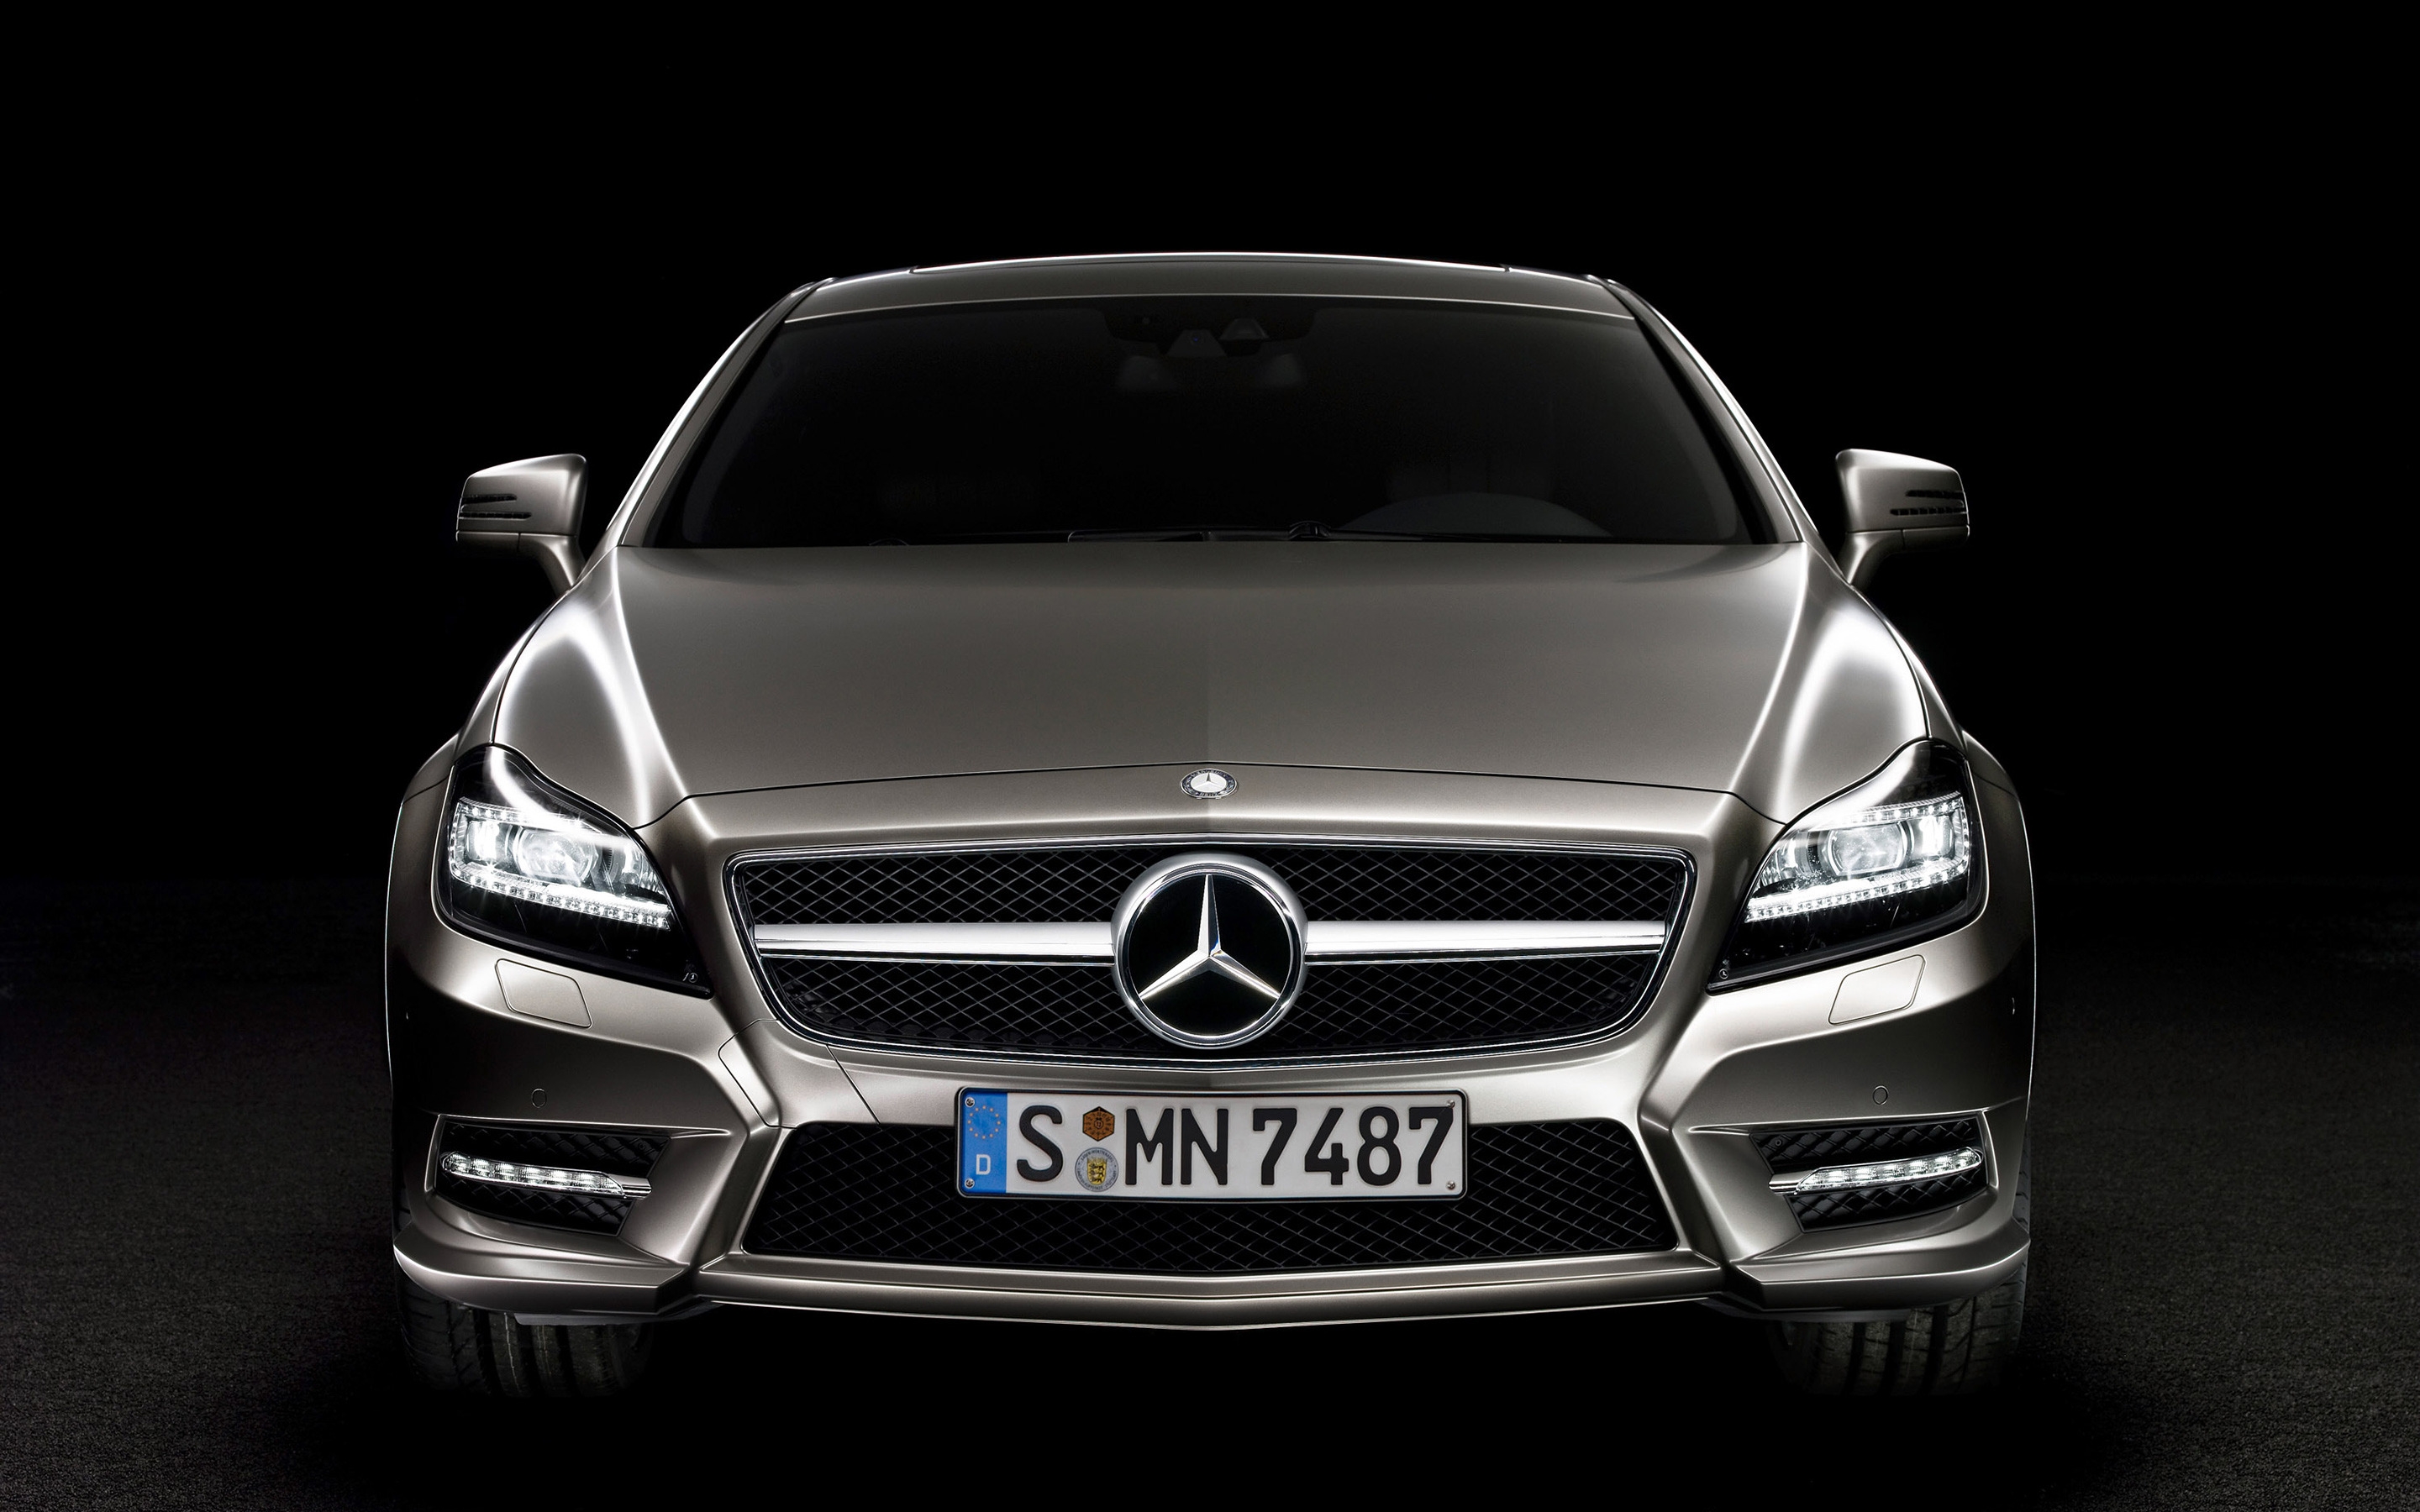 2012 Mercedes Benz CLS Front for 2880 x 1800 Retina Display resolution